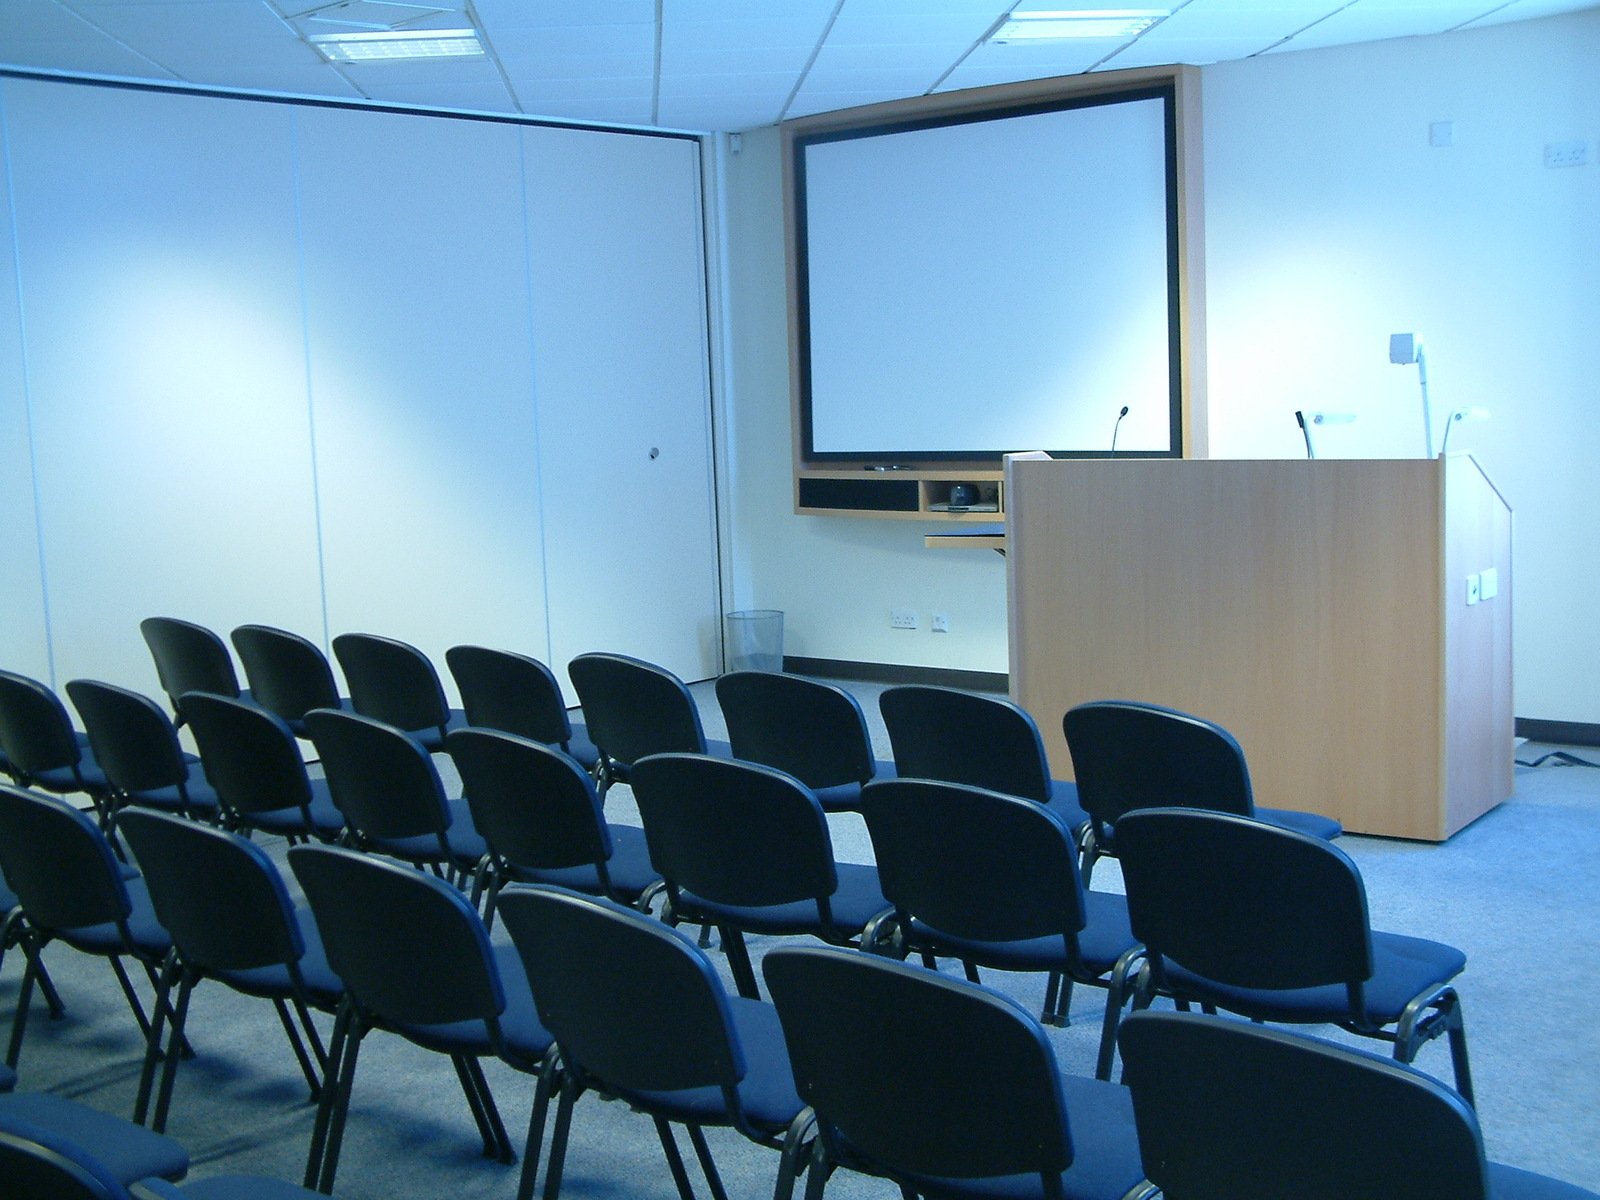 a conference room full of chairs with a podium